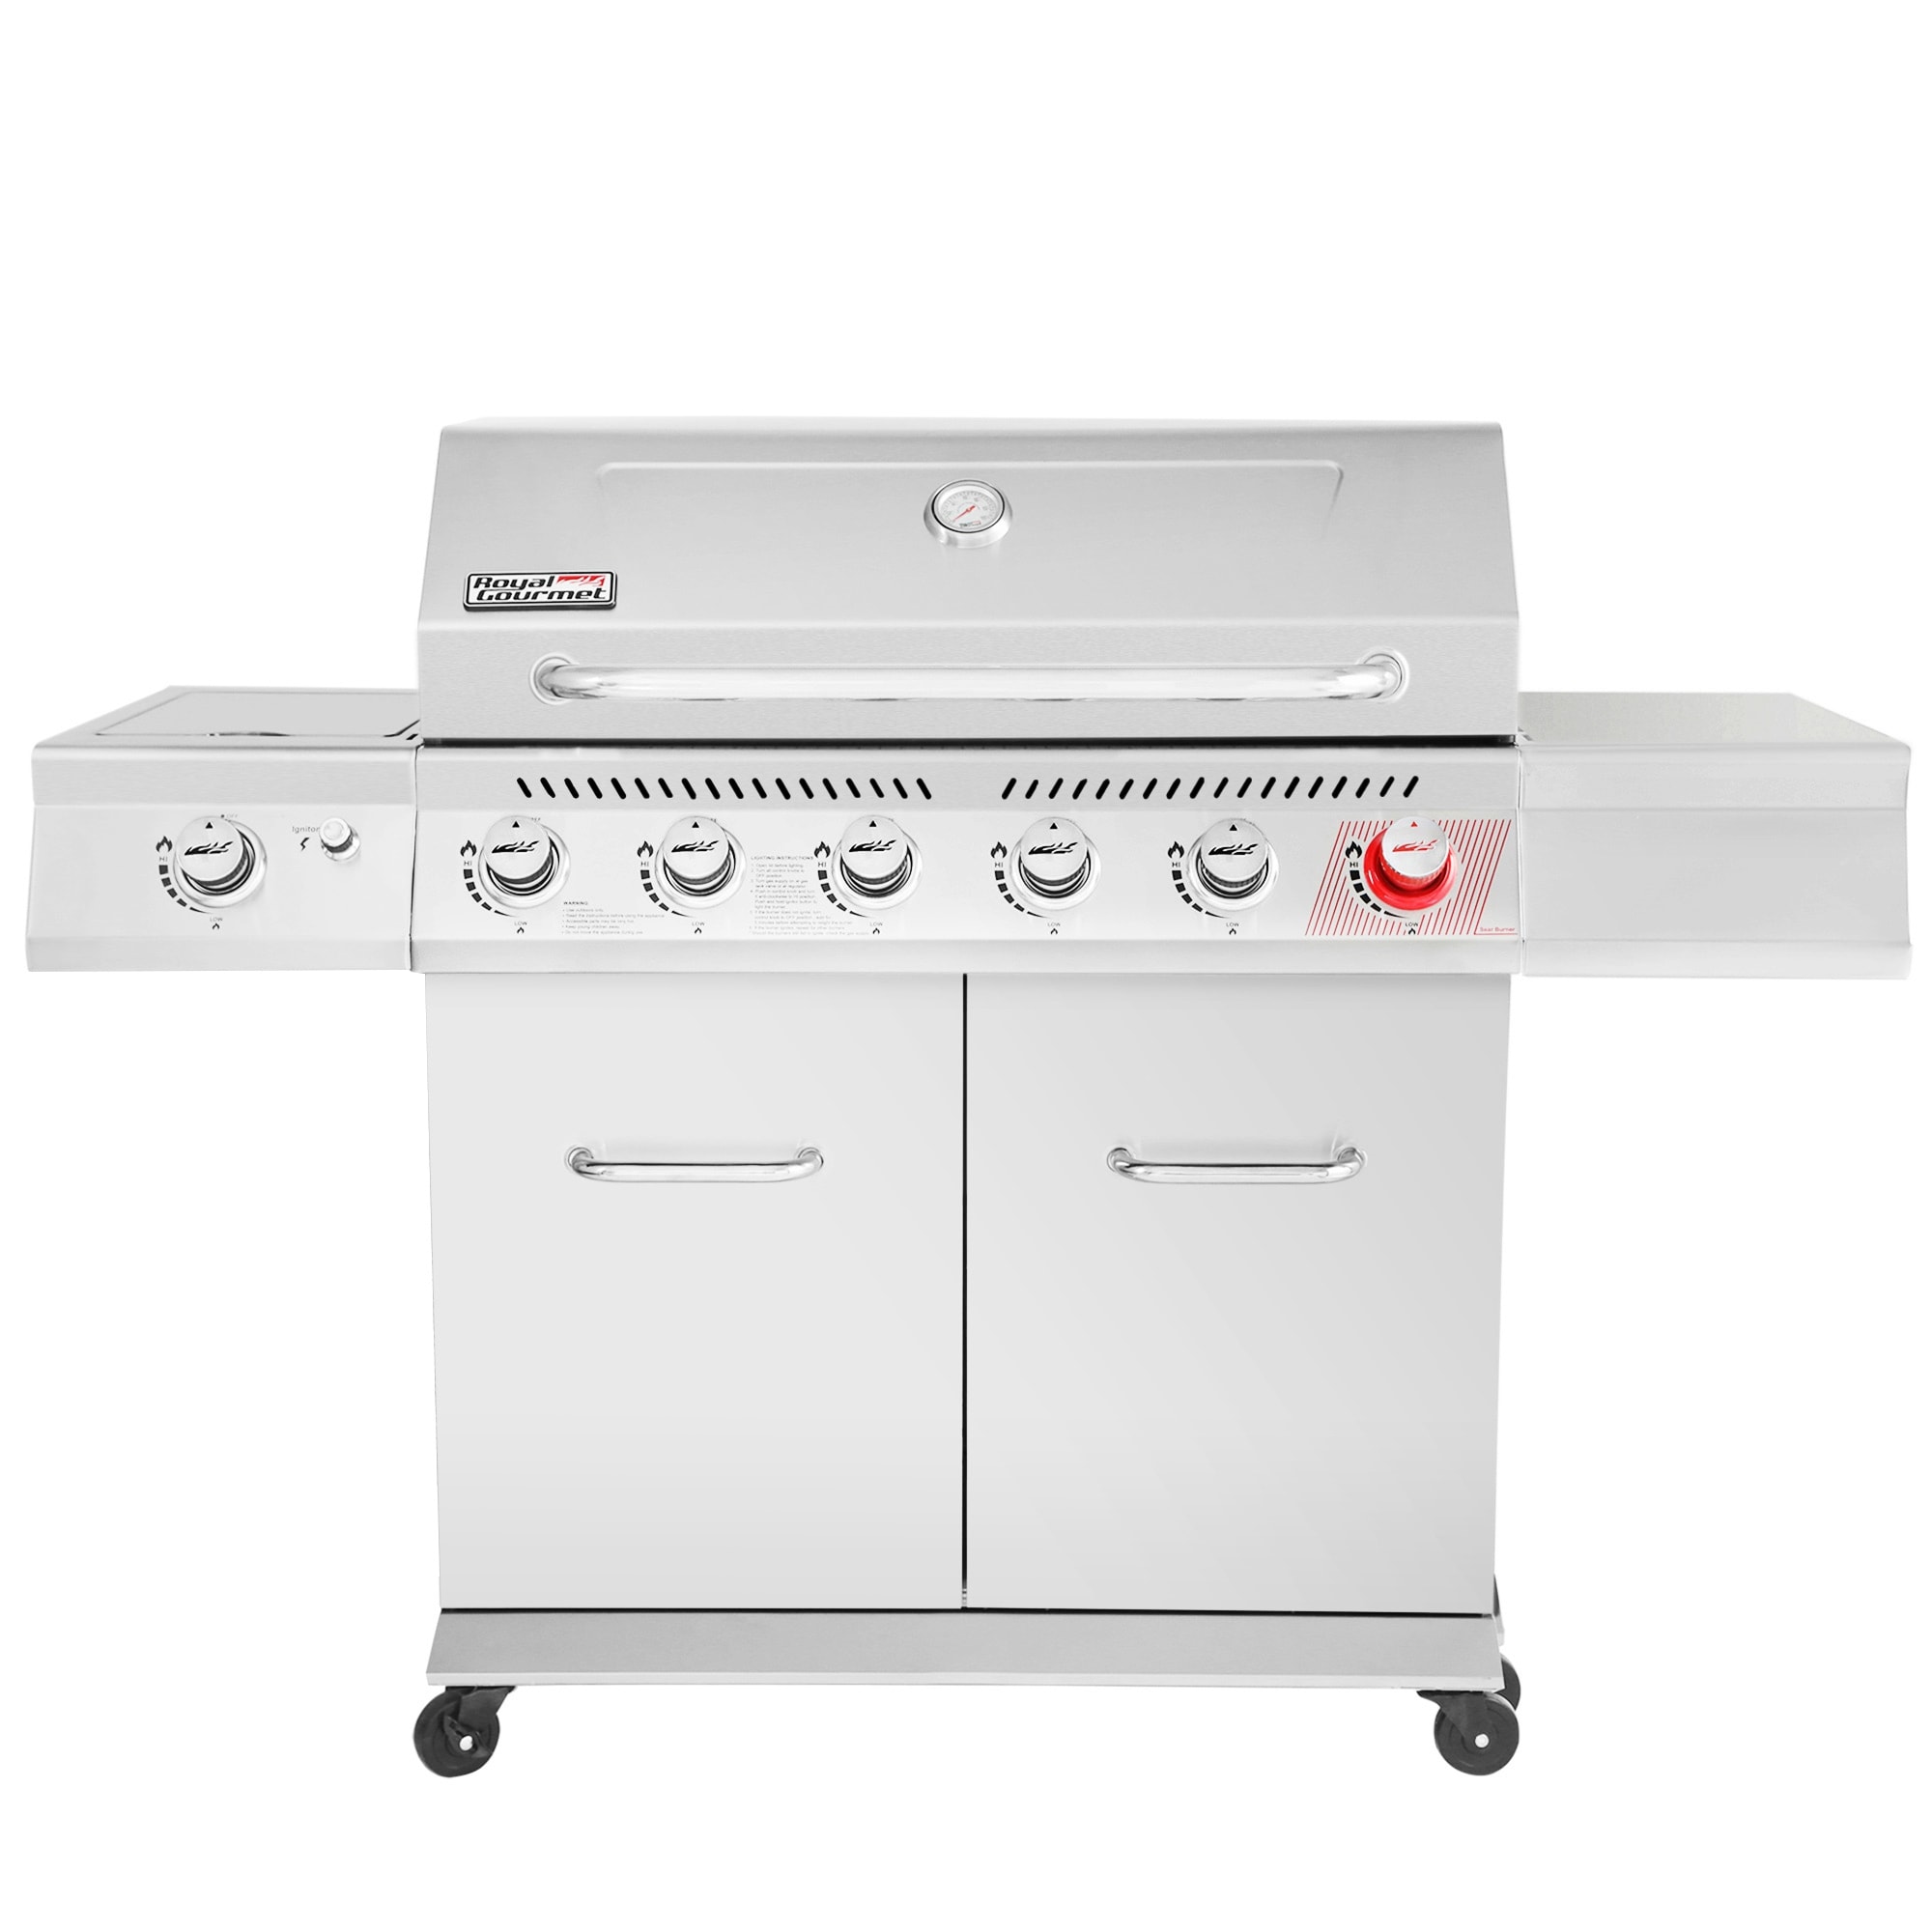 & Beyond Sale - Gas with Royal Bed Stainless Side Gourmet Burner, - Steel Silver Grill, Grill BBQ Burner Sear - Premier Bath and 36898562 6-Burner On